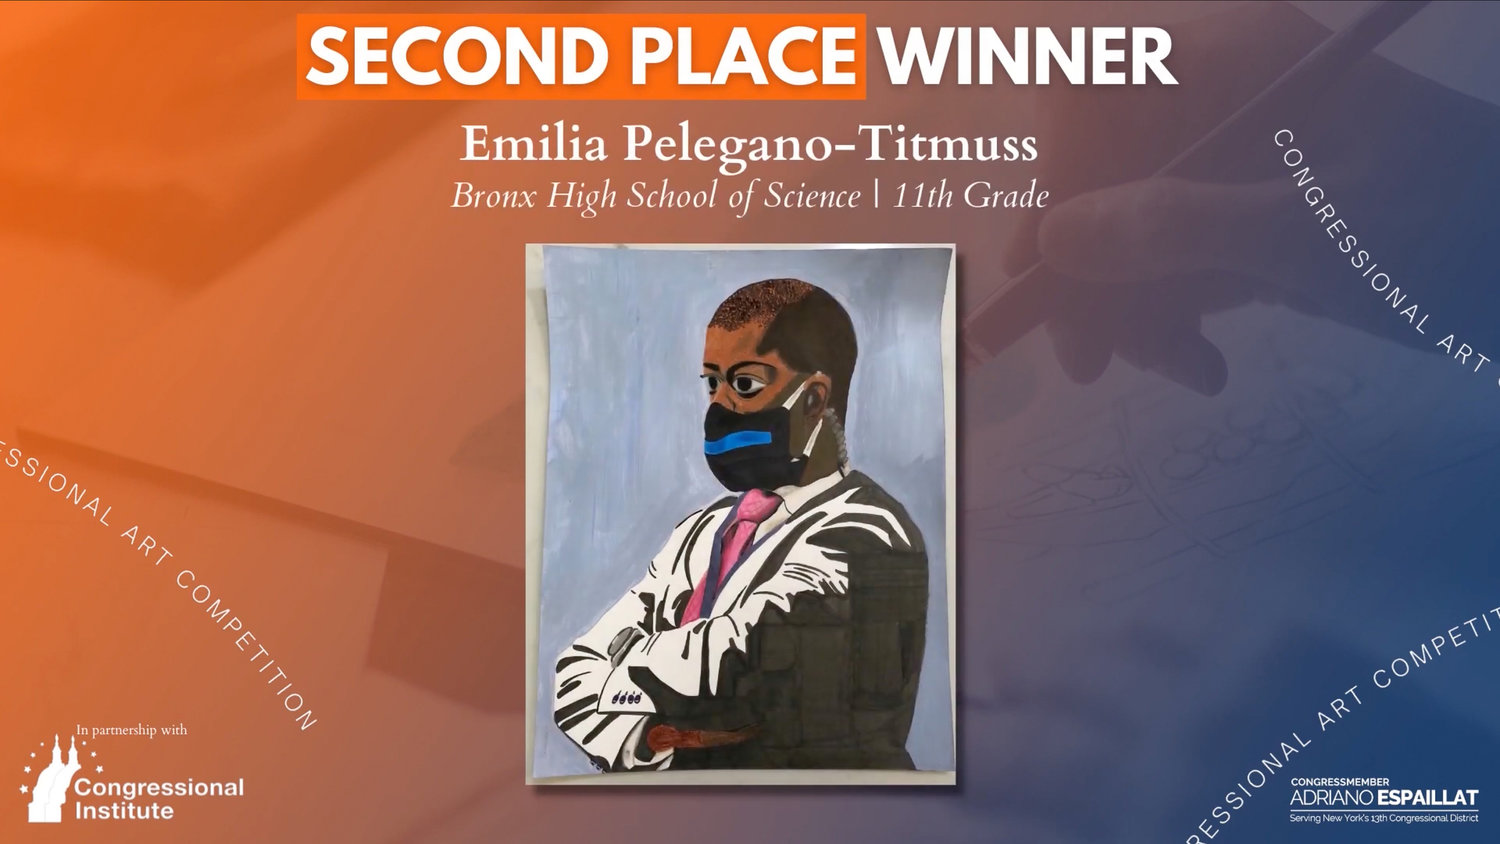 The second place winner in Congressman Adriano Espaillat's previous Congressional Art Competition was Emilia Pegano-Titmuss of the Bronx High School of Science.